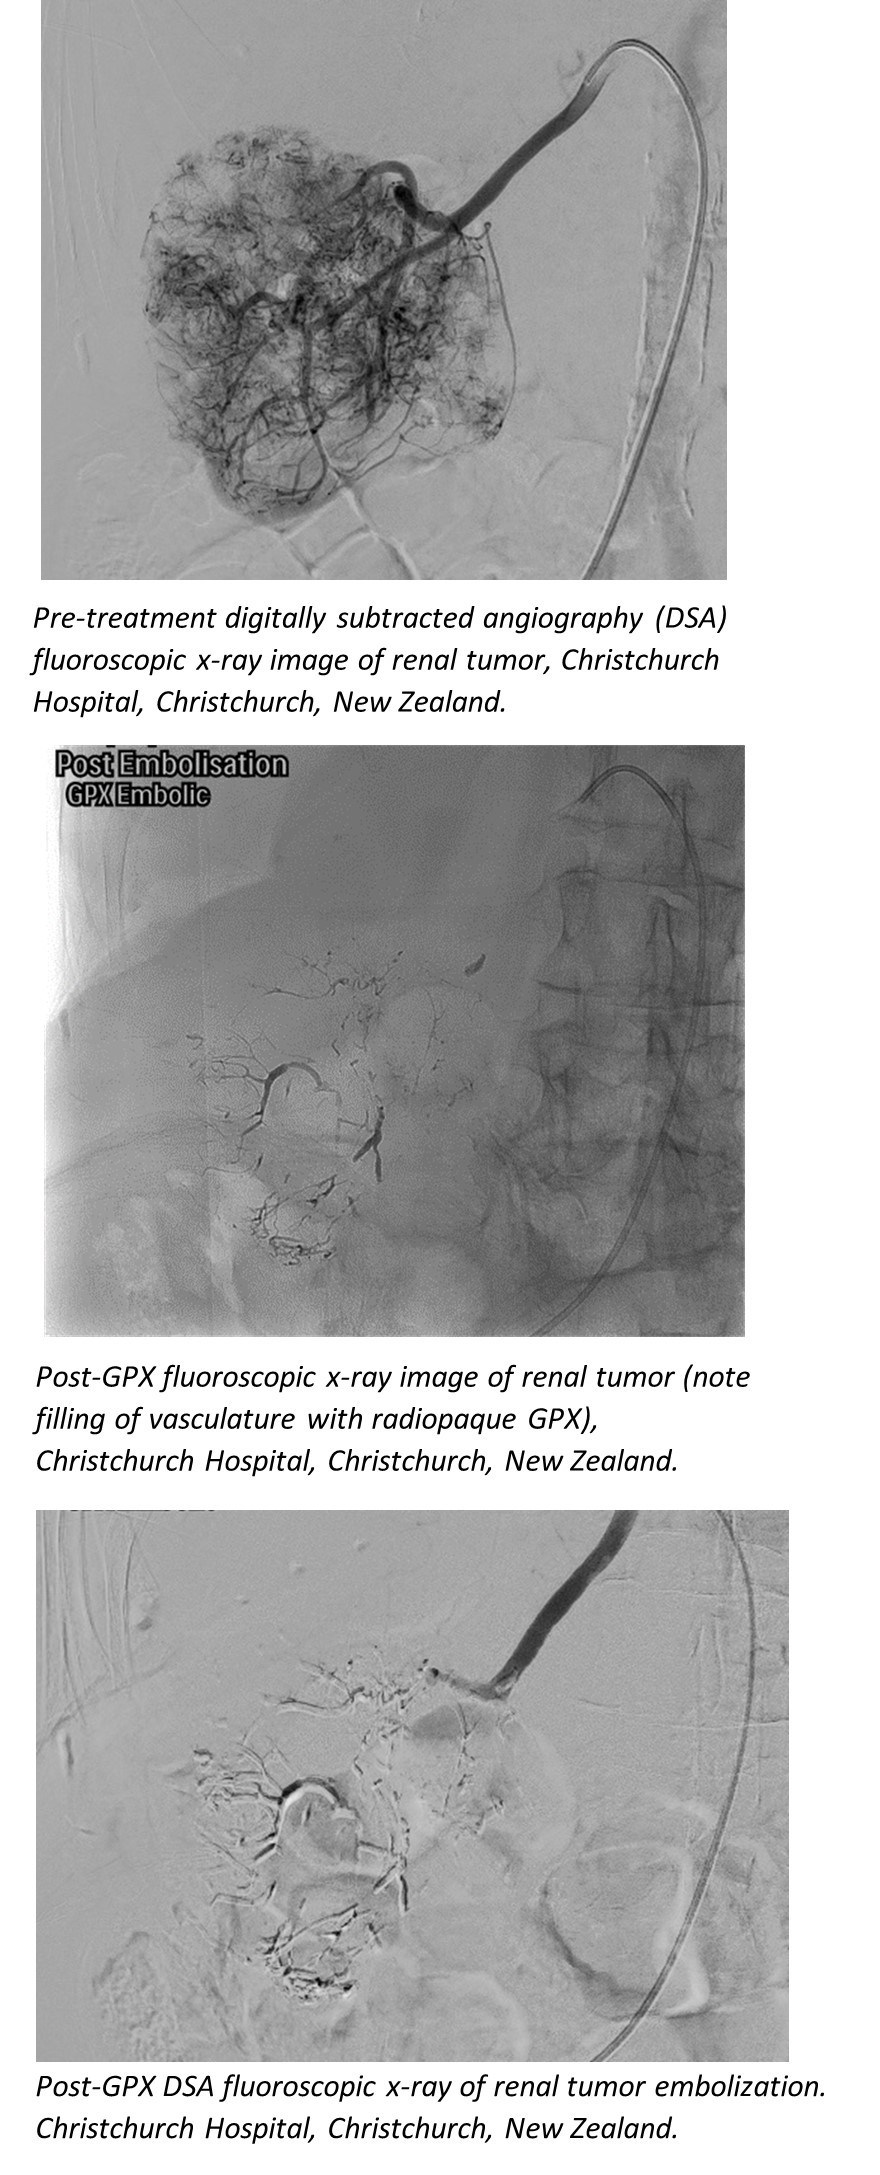 Renal Tumor Embolization Using the GPX Embolic Device, Christchurch Hospital, Christchurch, New Zealand